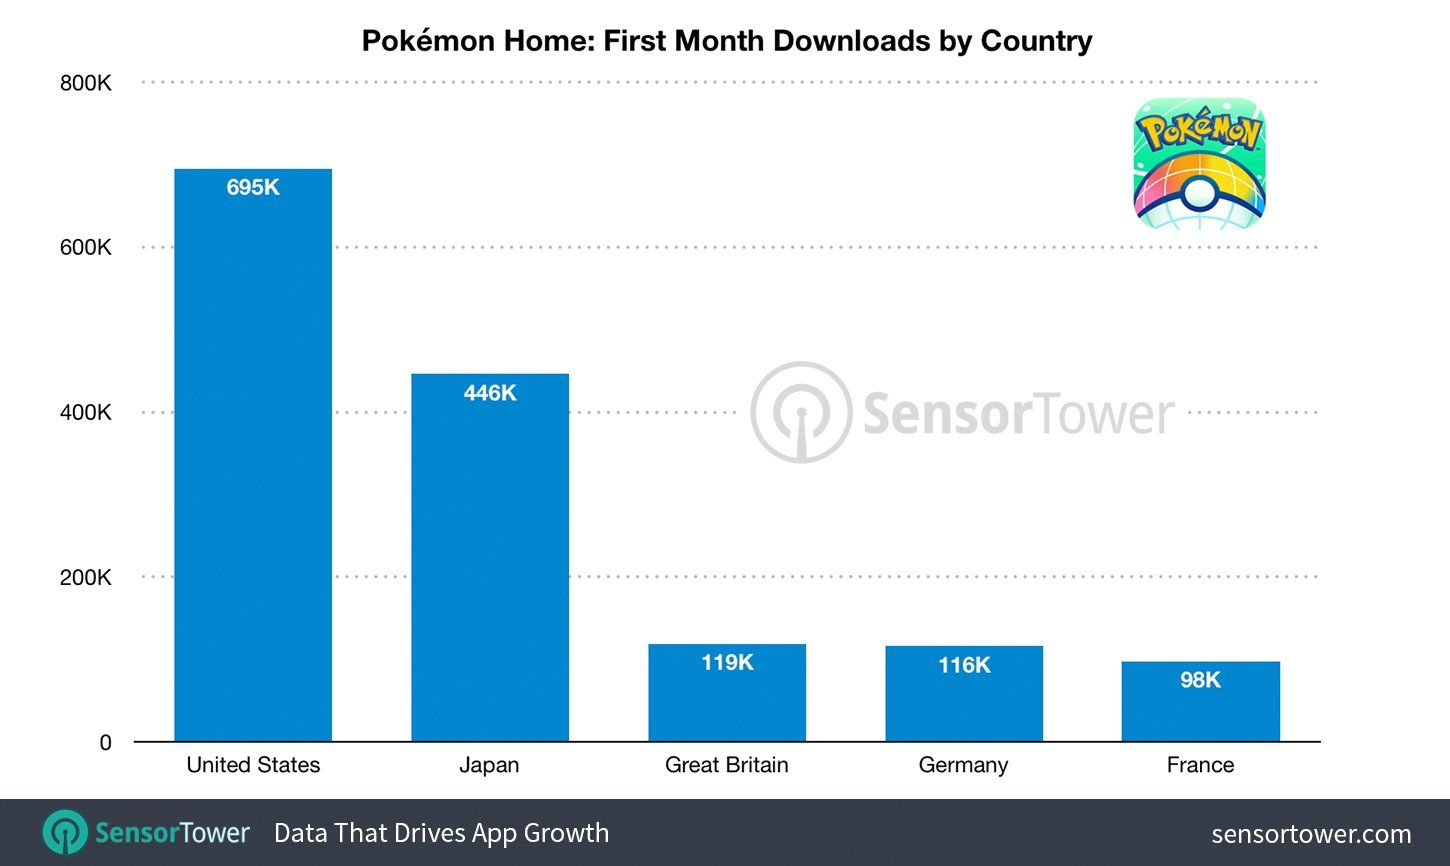 Pokémon Home Catches $26 Million In Gross Revenue During First Month